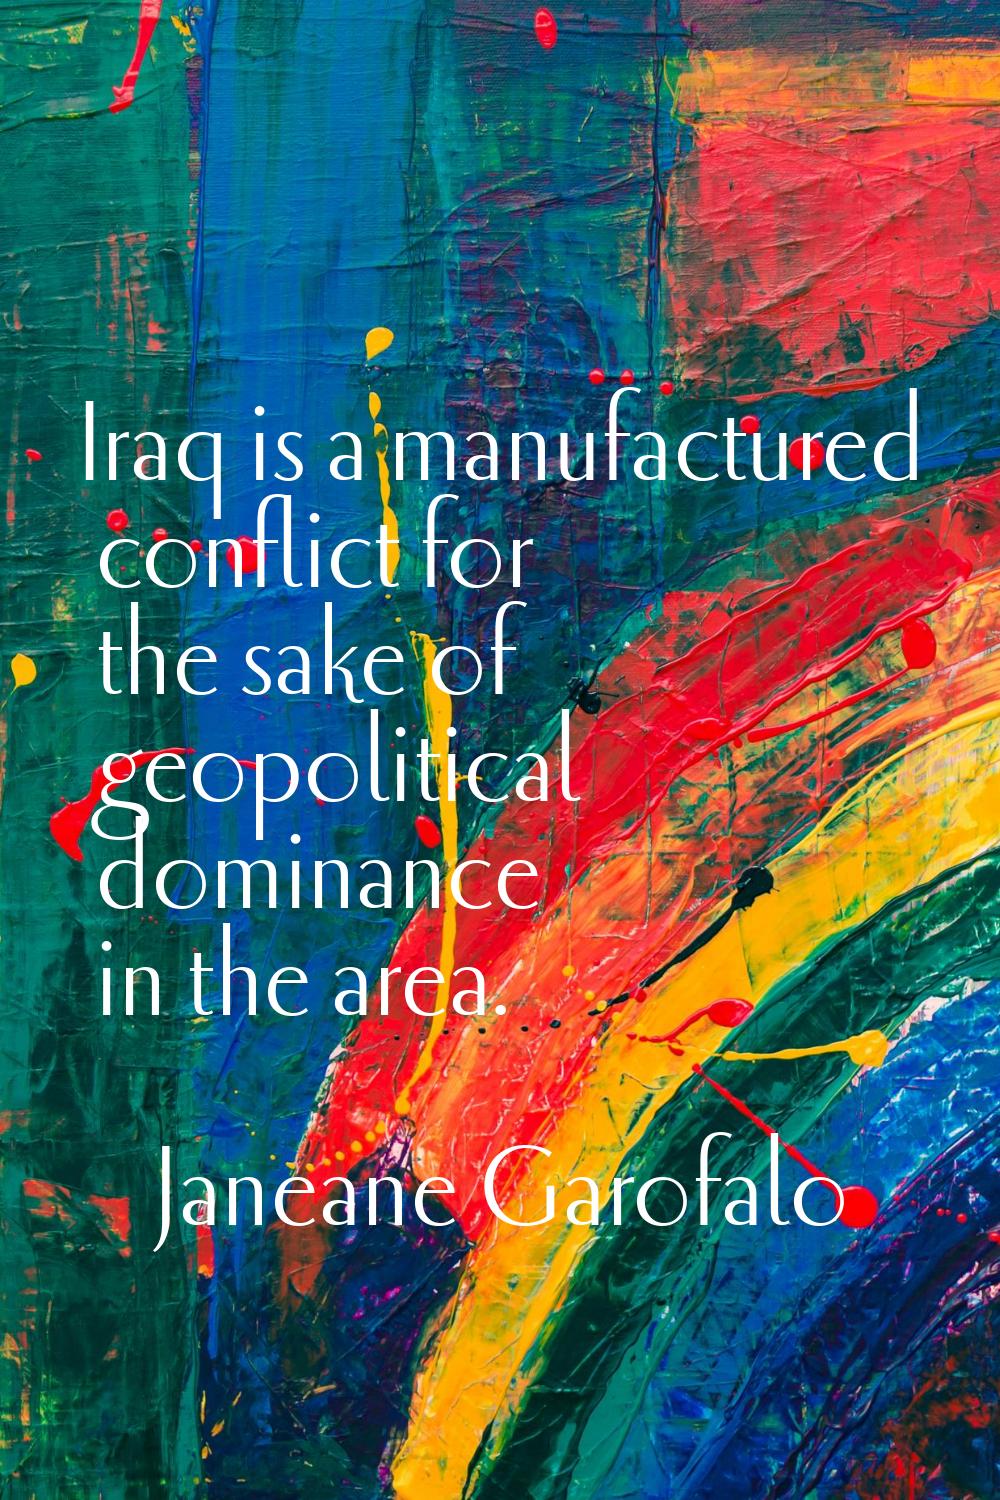 Iraq is a manufactured conflict for the sake of geopolitical dominance in the area.